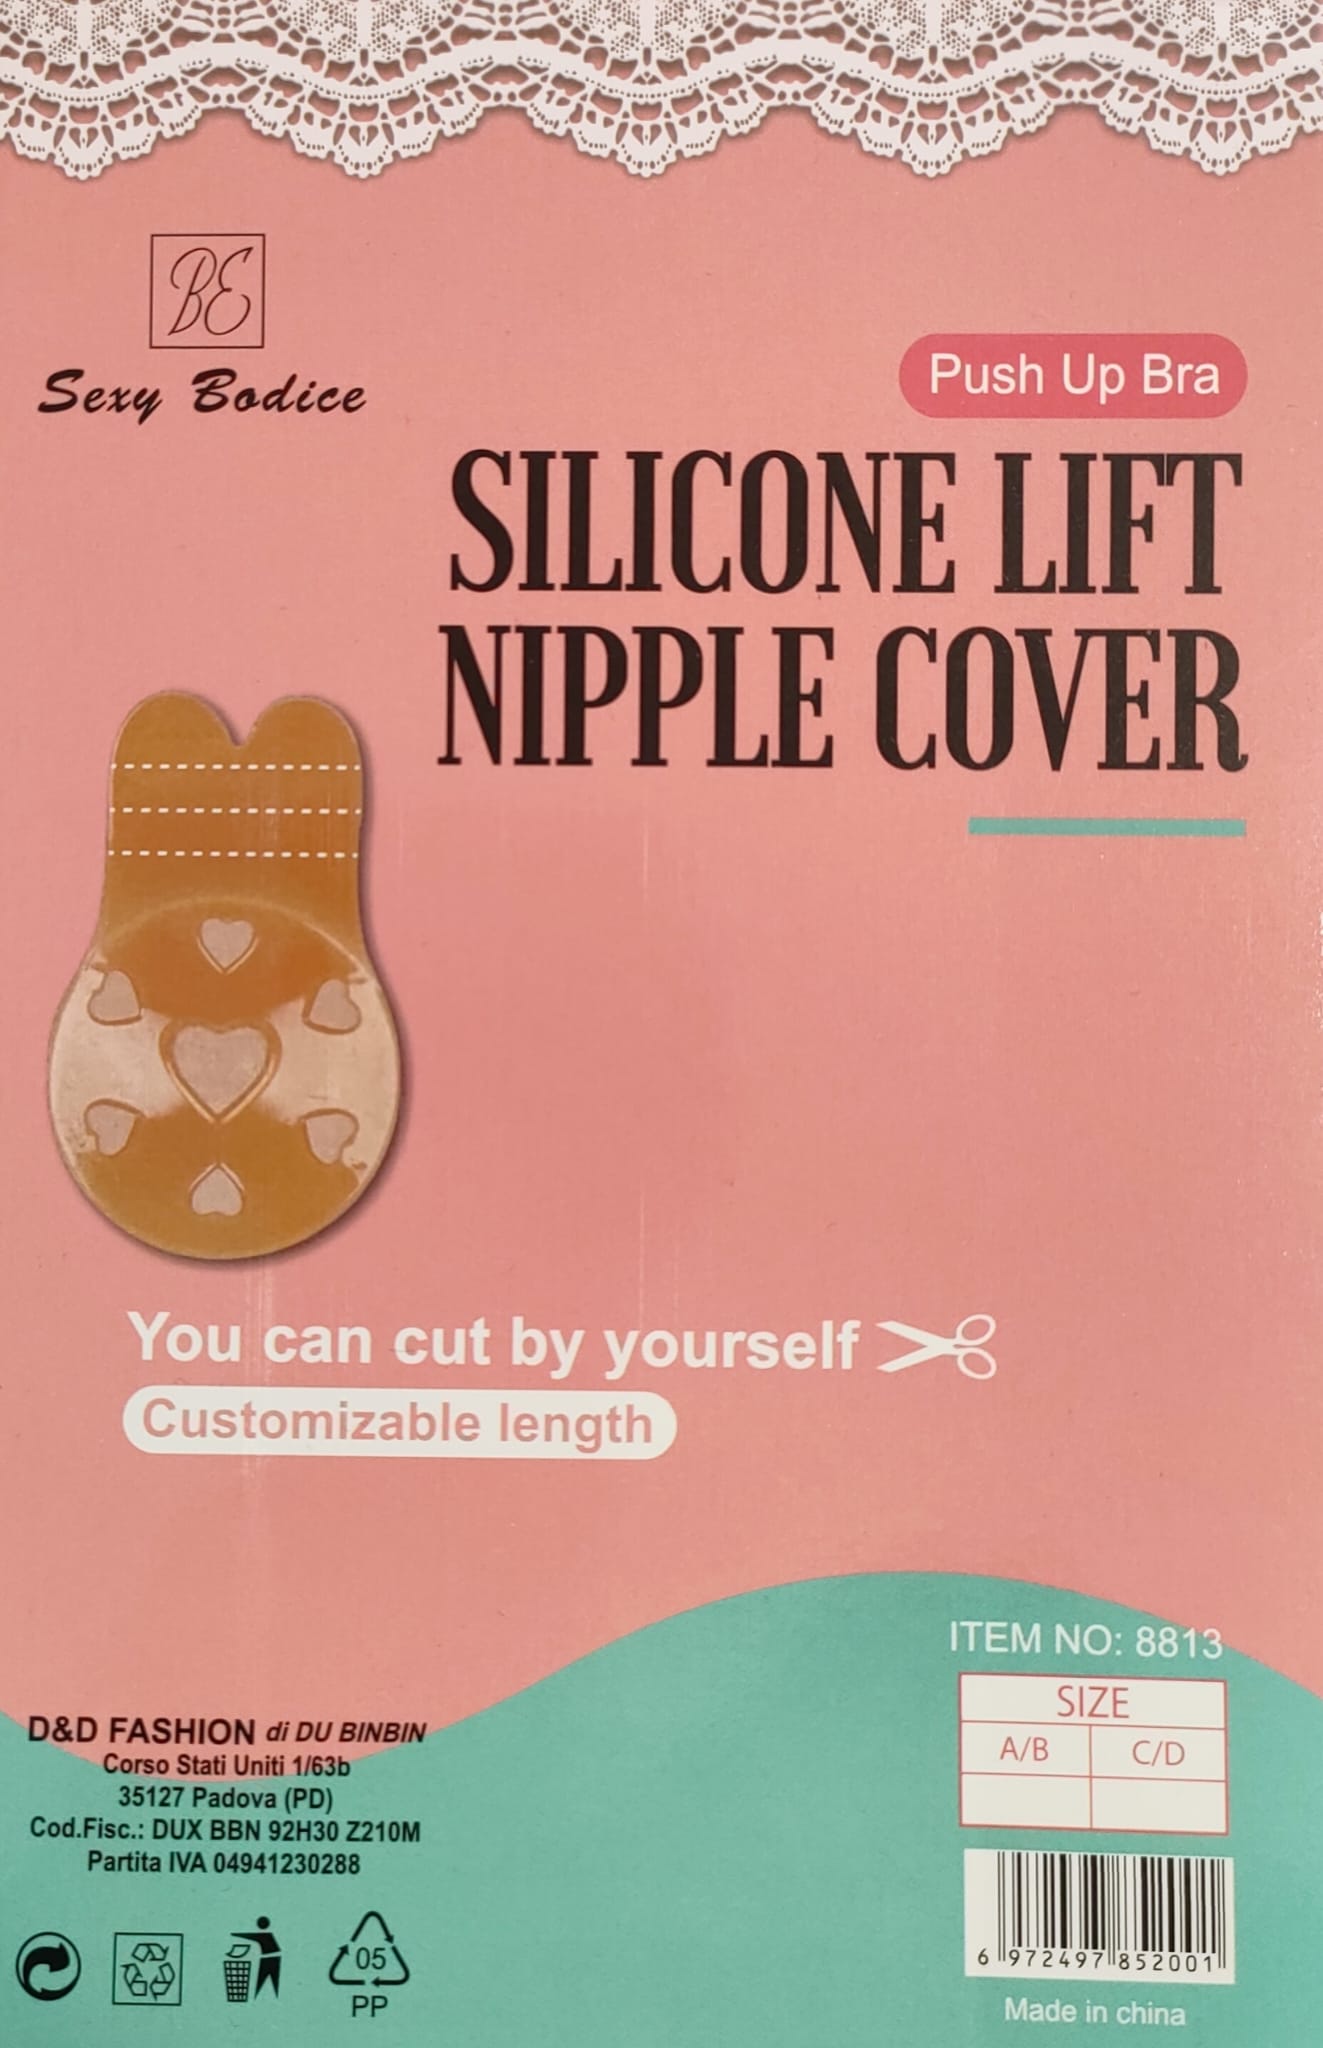 Silicone Lift Nipple Covers